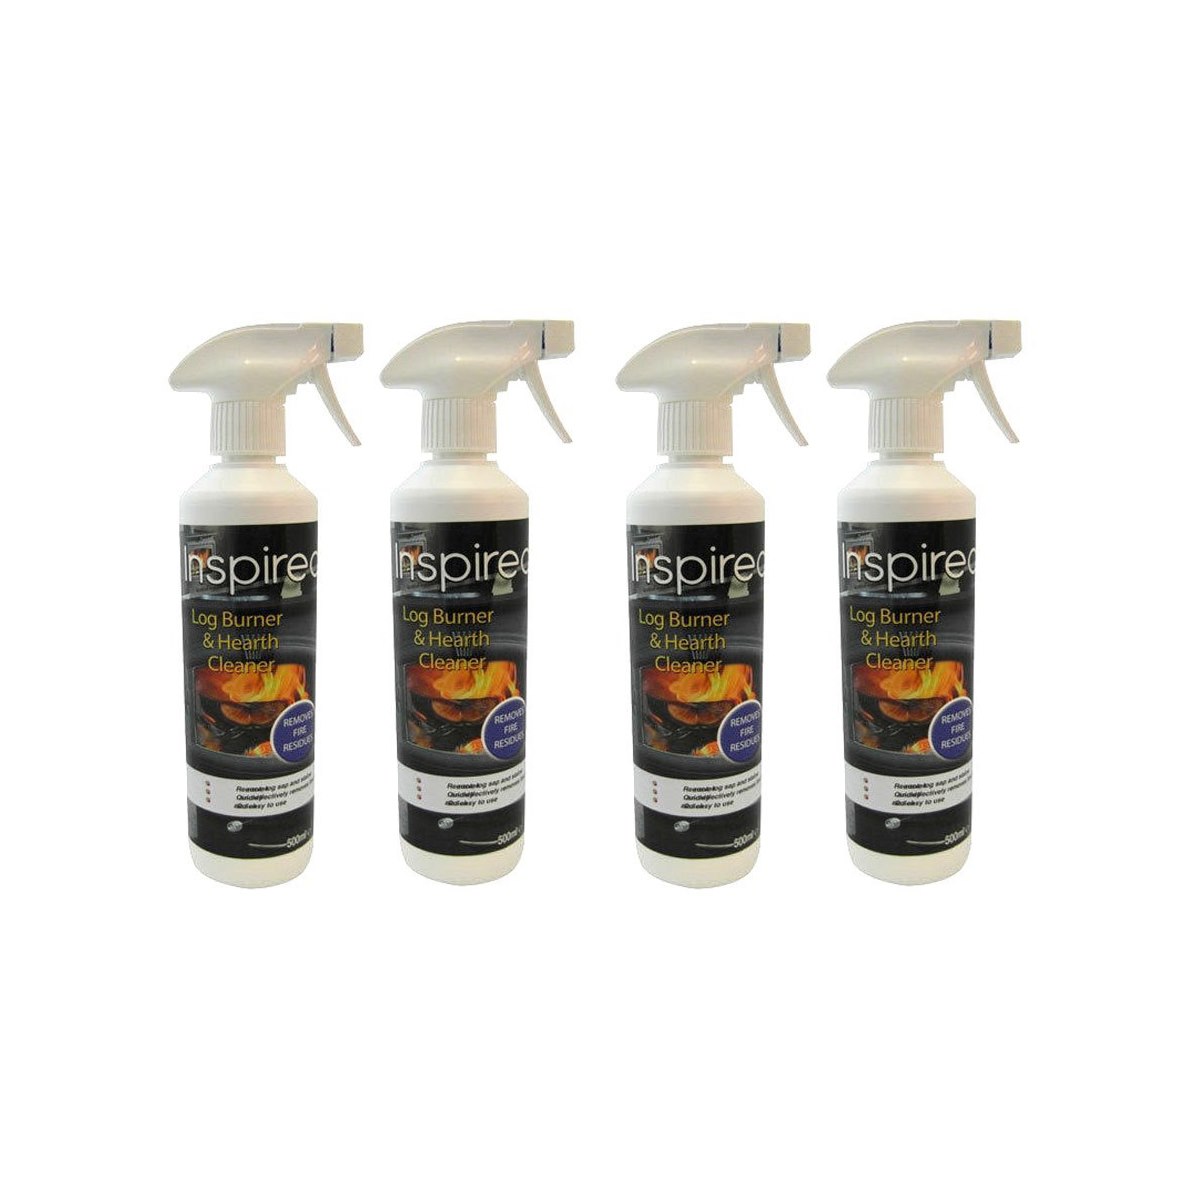 Pack of 4 x Inspired Log Burner and Hearth Cleaner Spray 500ml